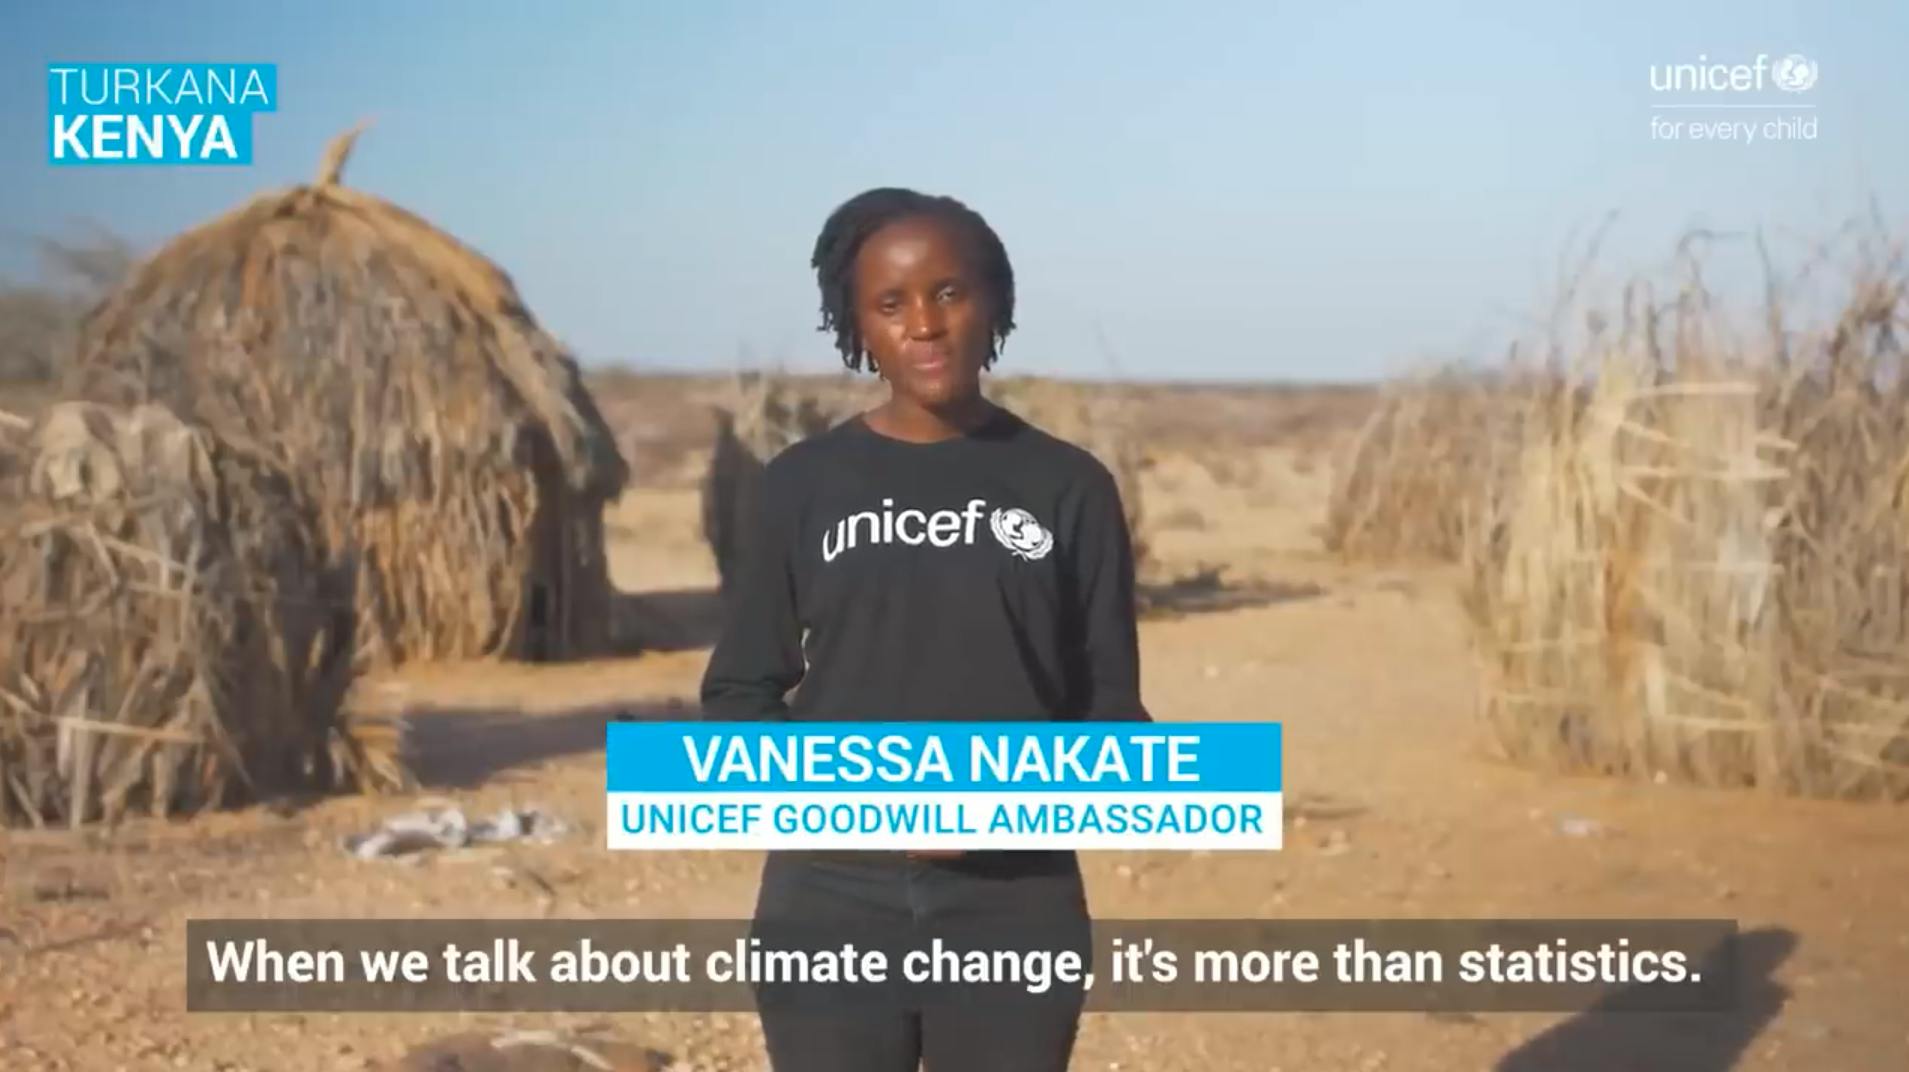 A video about Climate Change told by Vanessa Nakate a UNICEF Goodwill Ambassador in Kenya.